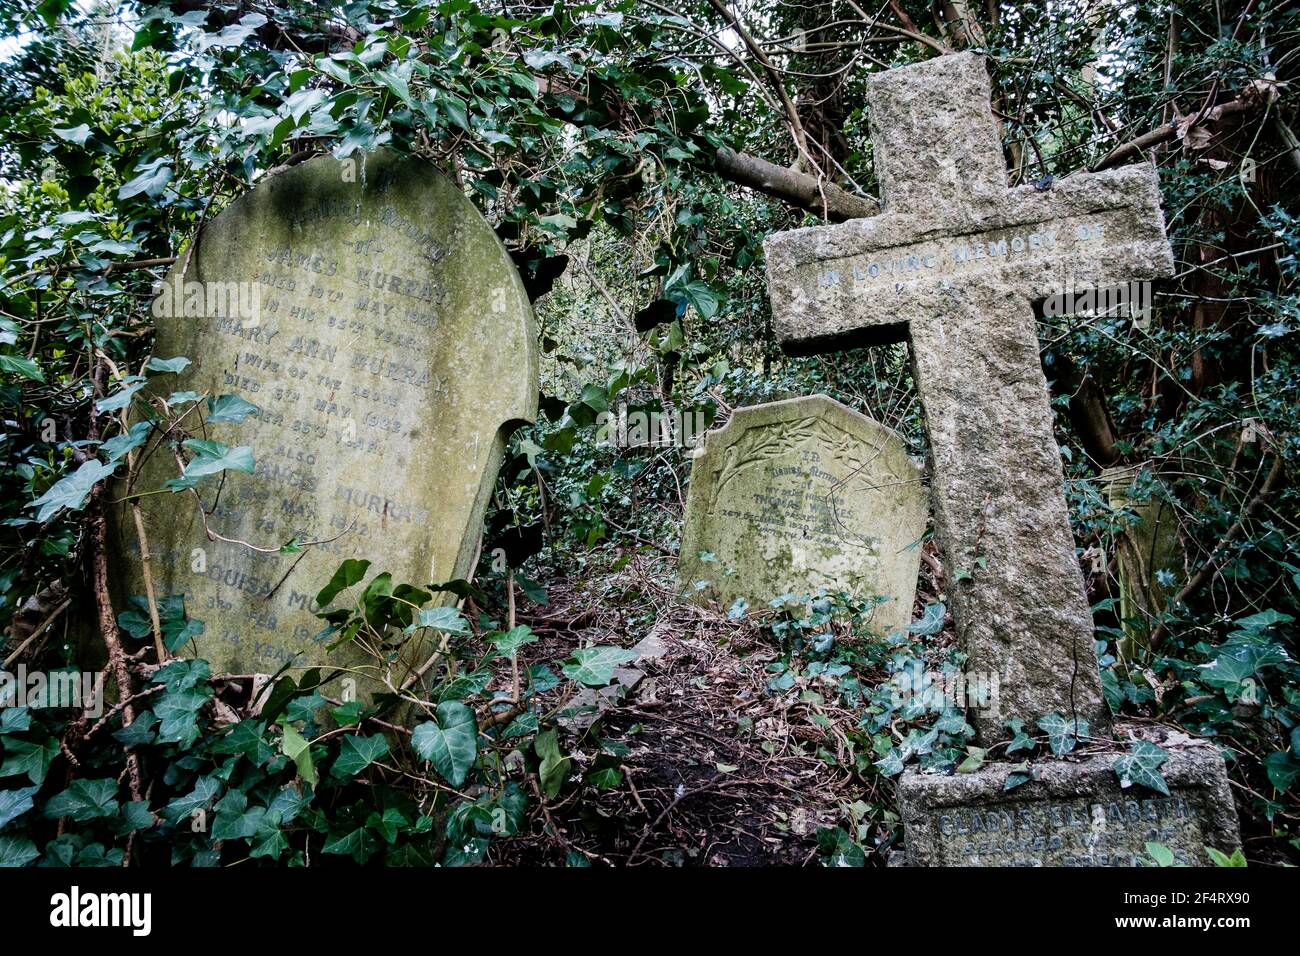 Overgrown and dilapidated graves, Nunhead Victorian cemetery, London, United Kingdom. Stock Photo